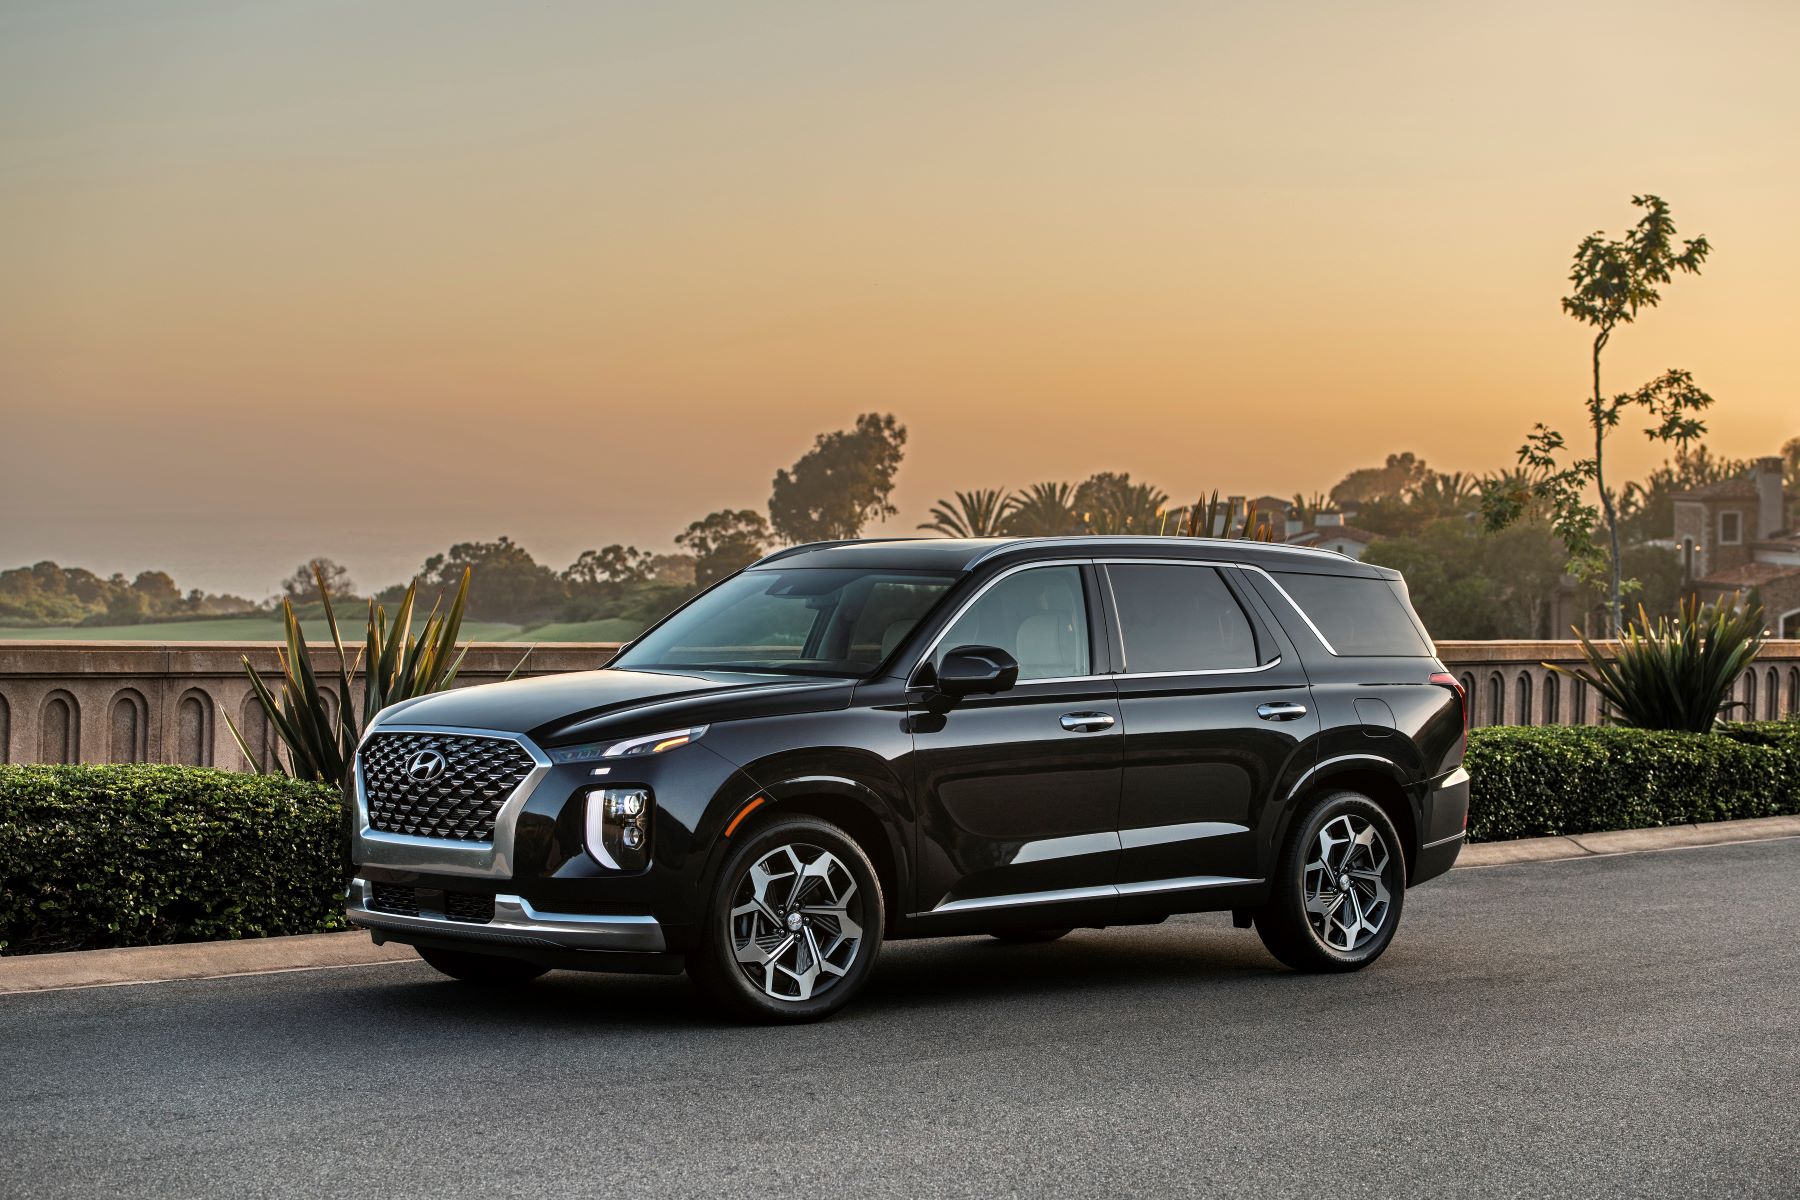 The 2022 Hyundai Palisade midsize SUV in black parked near bushes and tropical trees as the sun sets in an orange sky